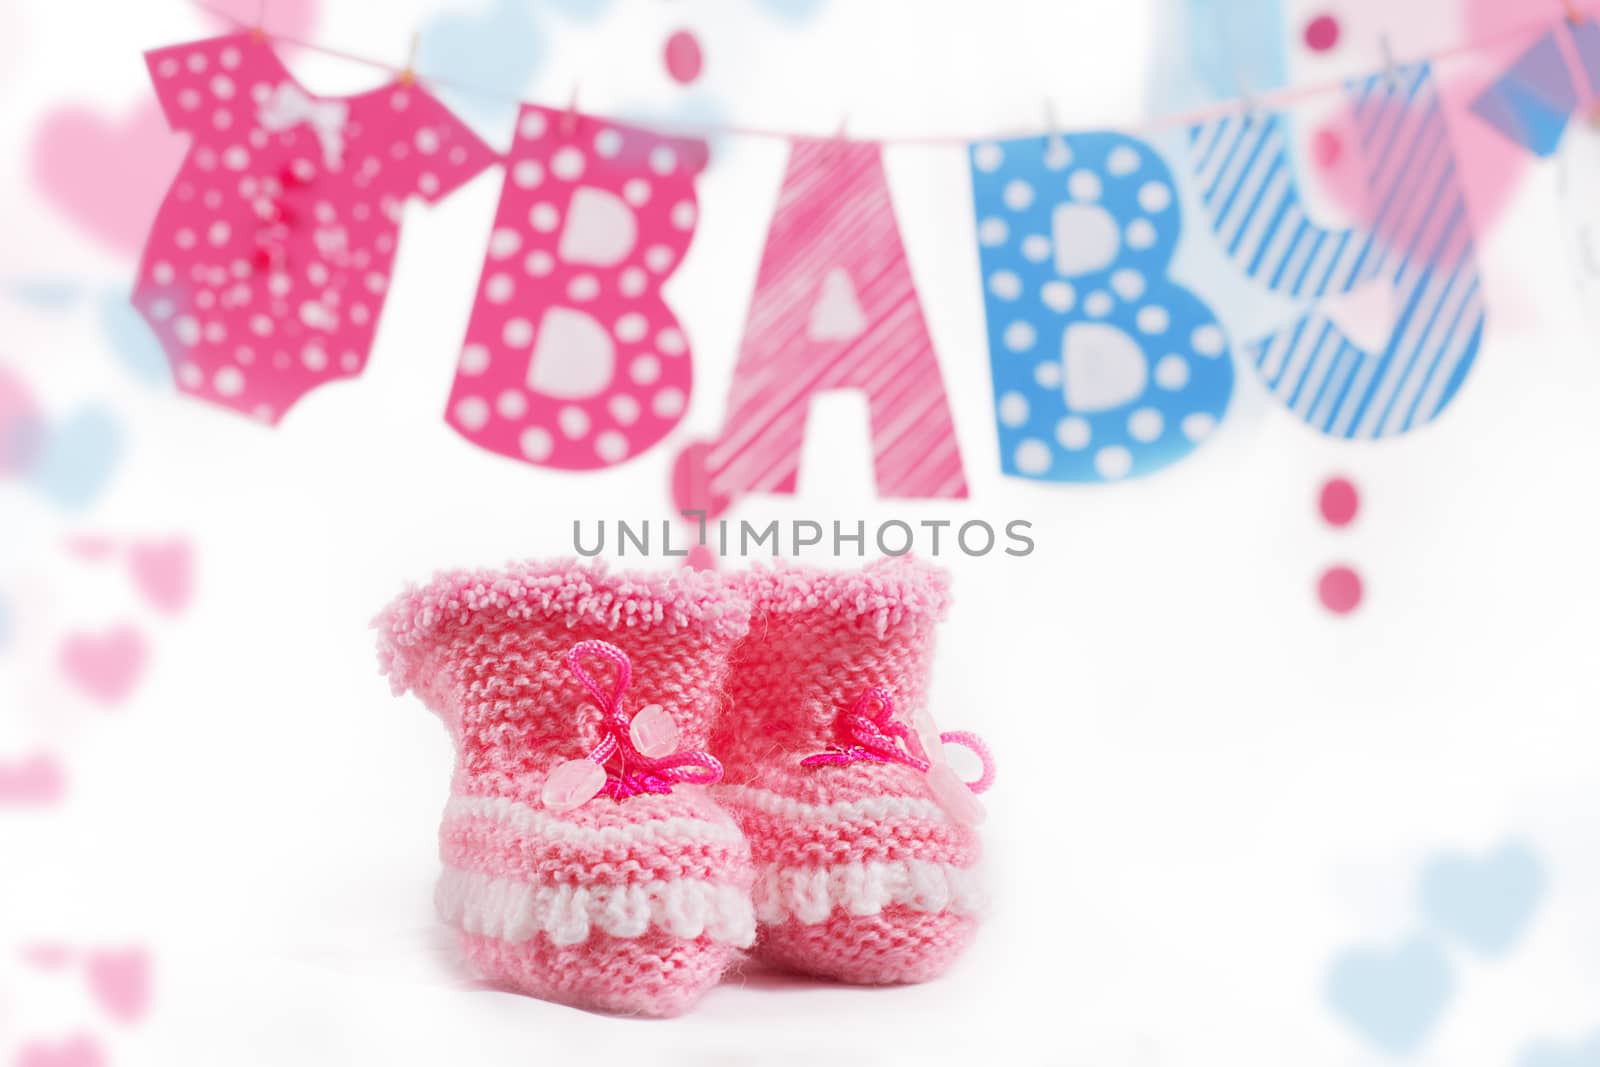 Pink bootees and baby word garland by Angel_a